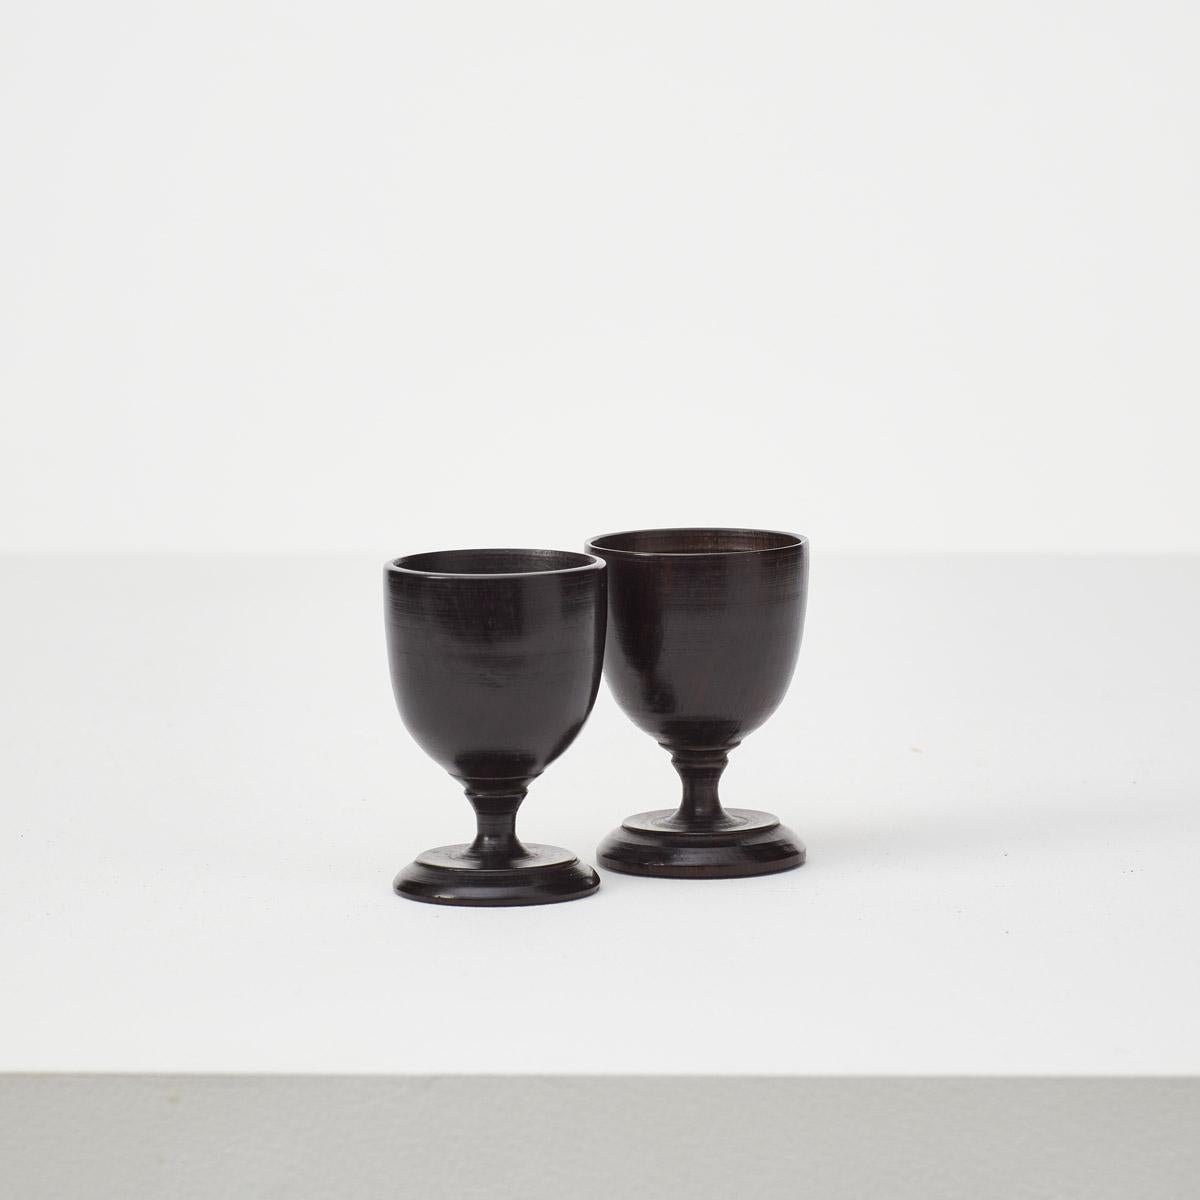 Hand carved upon a lathe, this pair of ebonised wooden egg cups are small and perfectly formed. The hand carving creates a slight variation in the size of the cups. In great vintage condition, with some light marks to the surface.